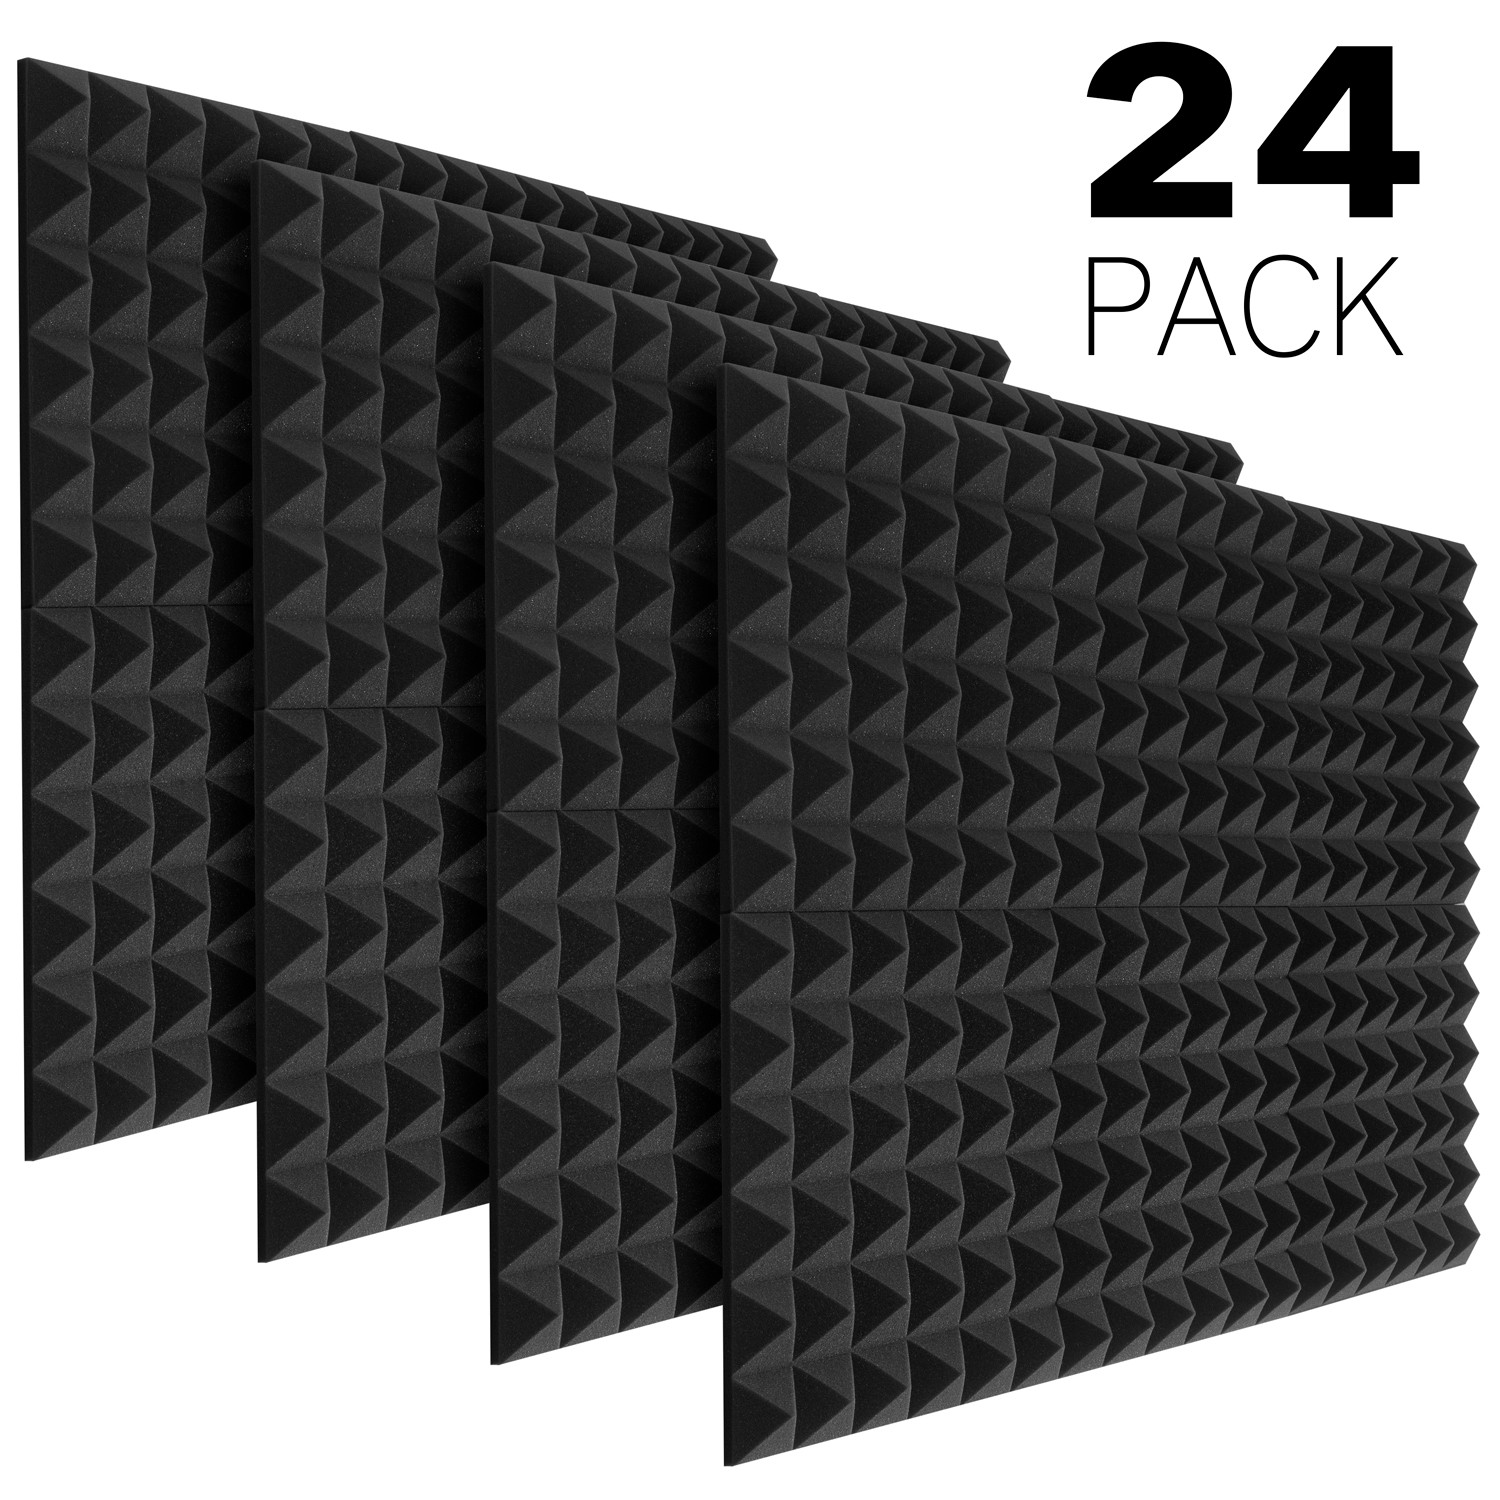 2 X 12 X 12 Soundproofing Treatment Studio Wall Padding Sound Absorbing Pyramid Acoustic Treatment Acoustic Sound Foam Panels 12 PACK, Black 